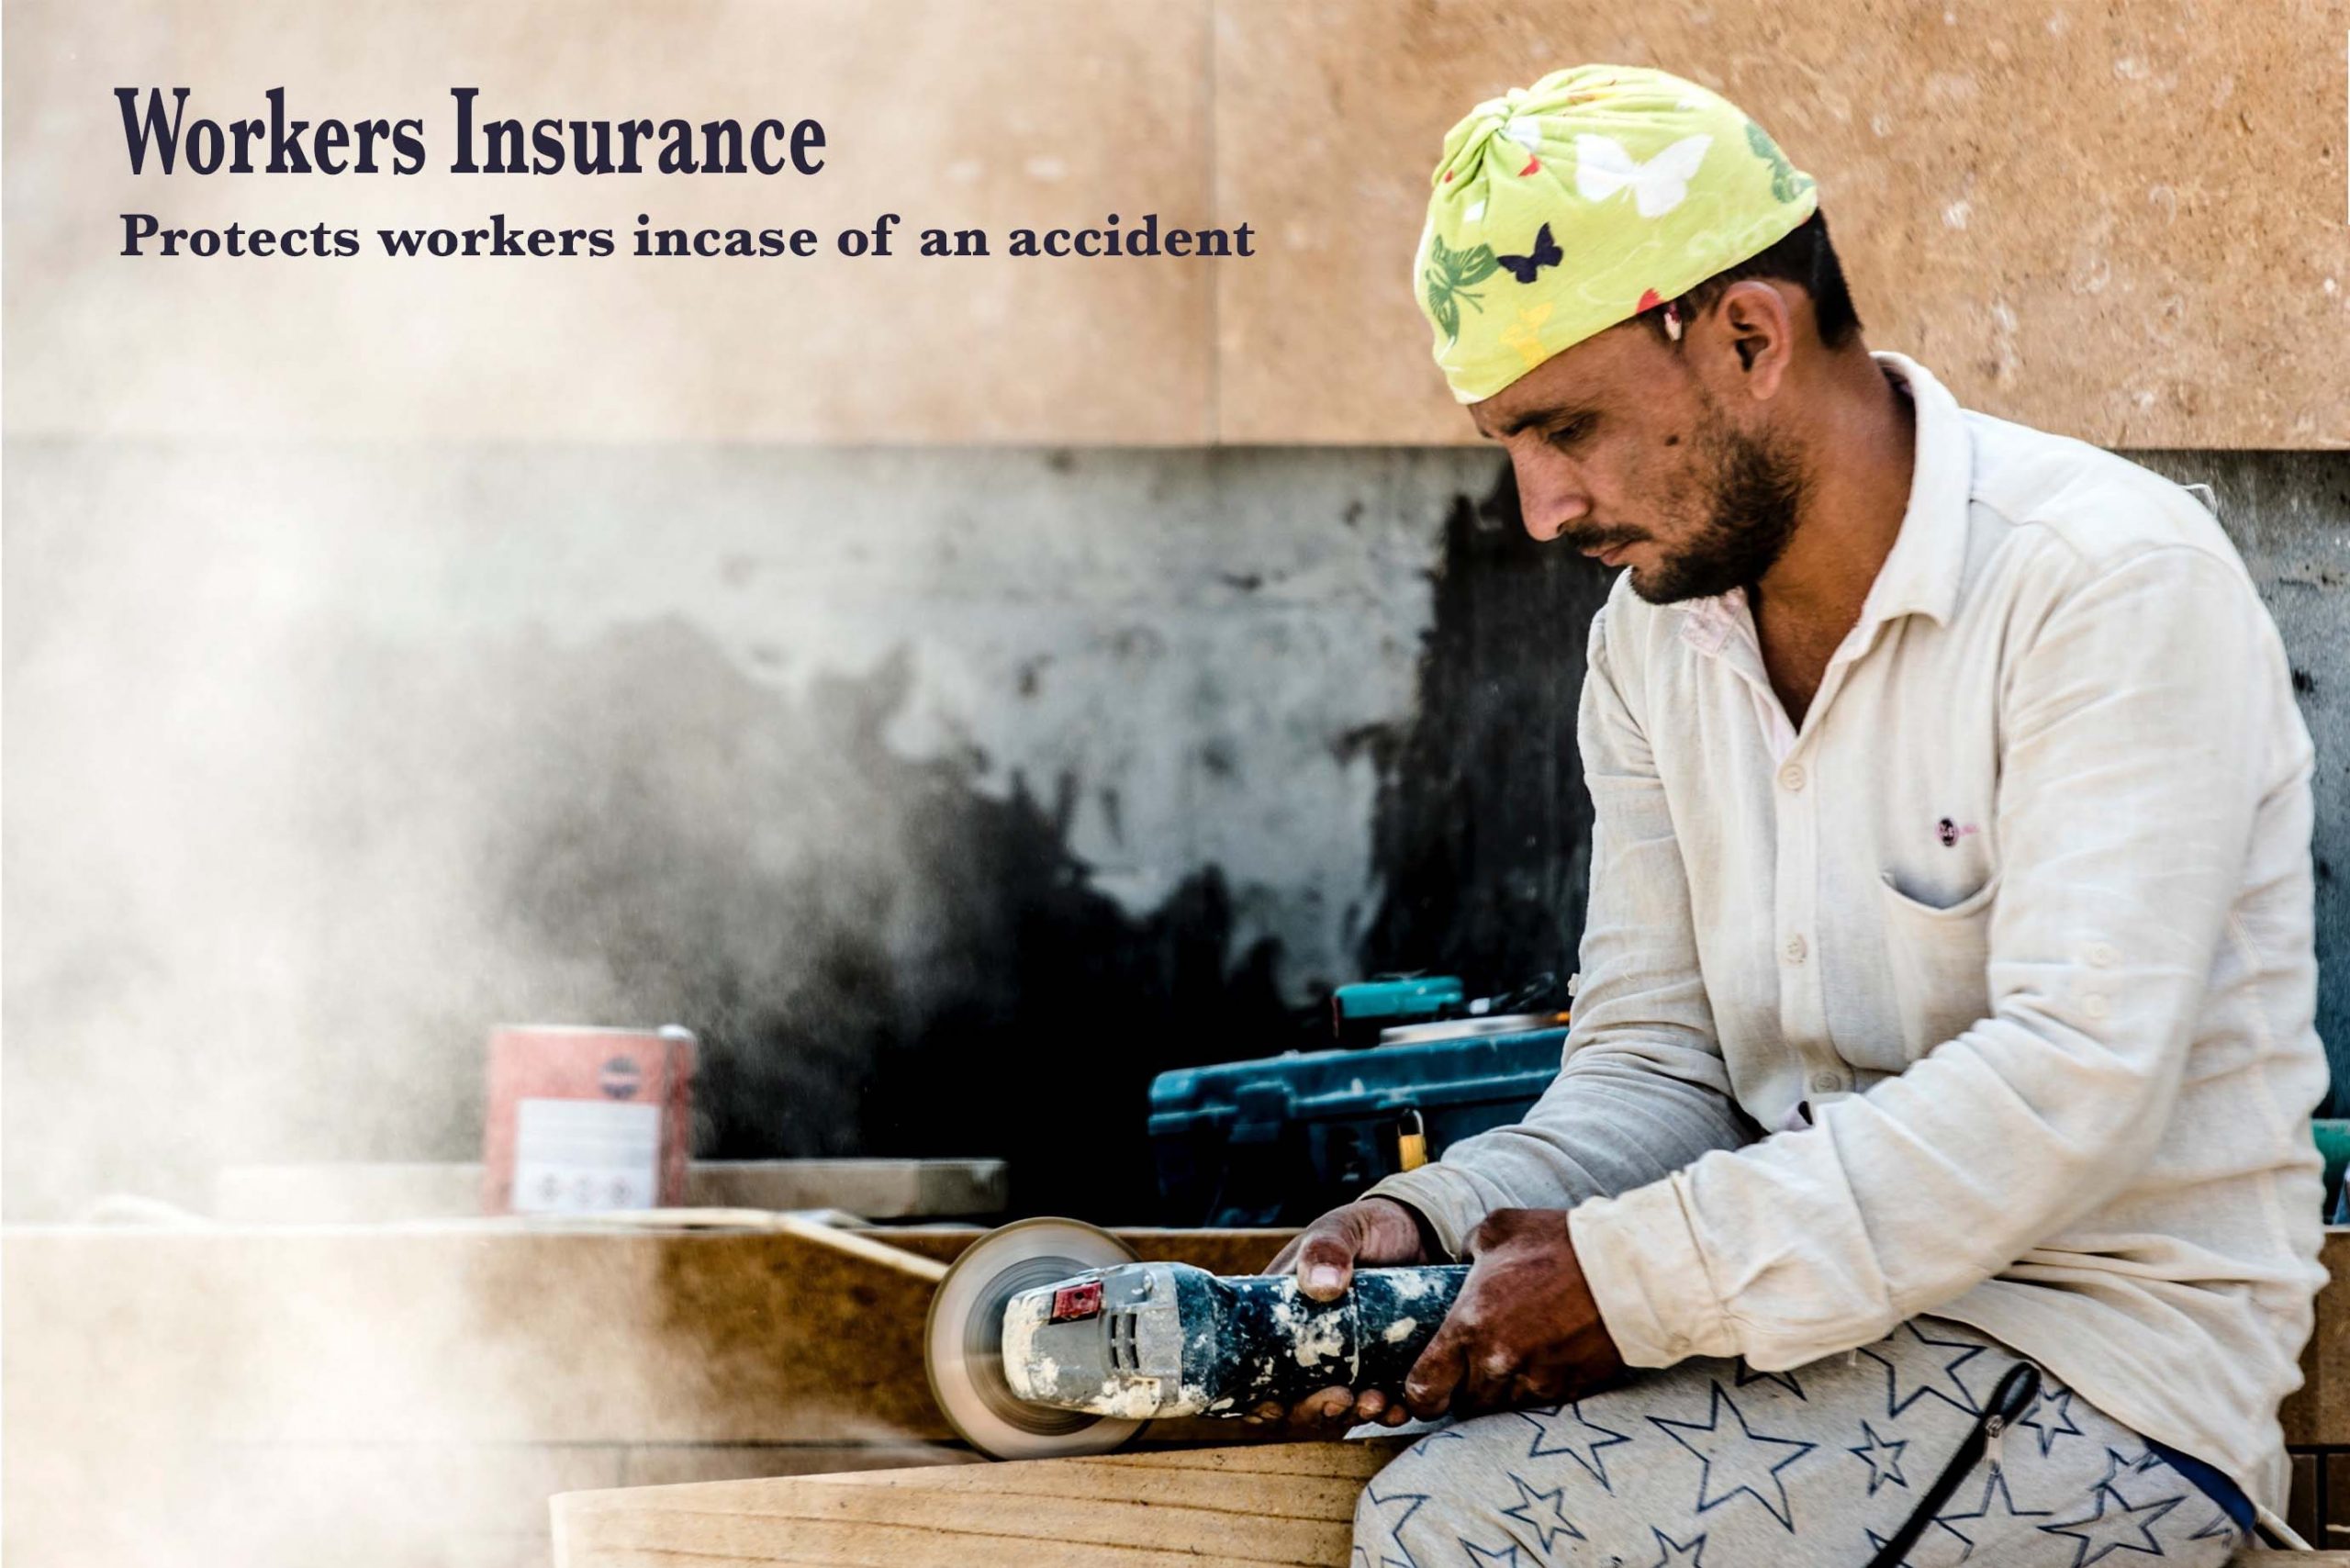 Benefits of Workers Insurance